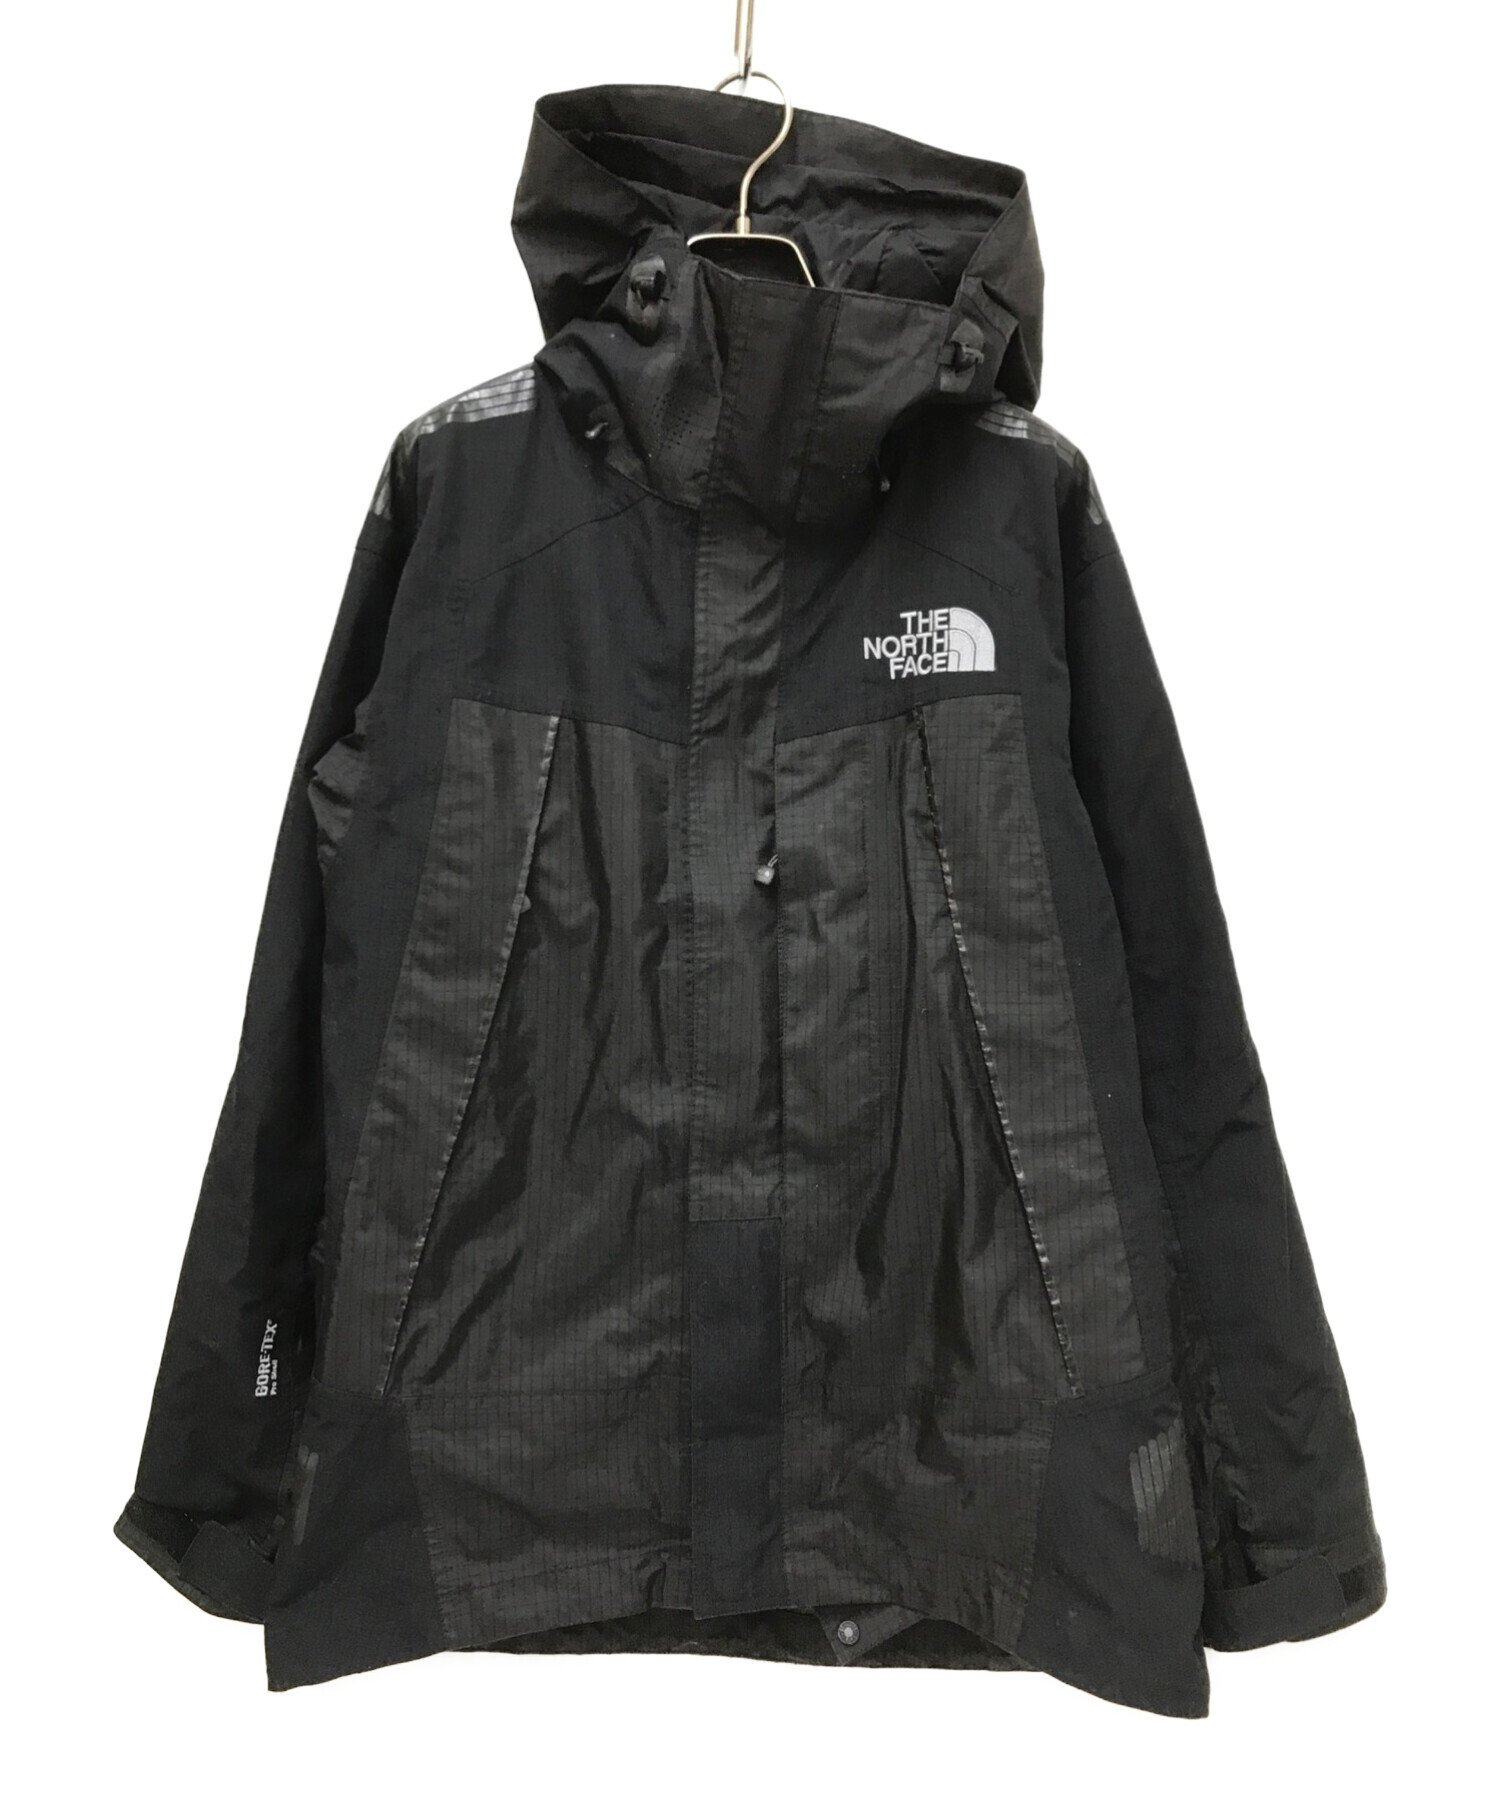 THE NORTH FACE MOUNTAIN GUIDE JACKET